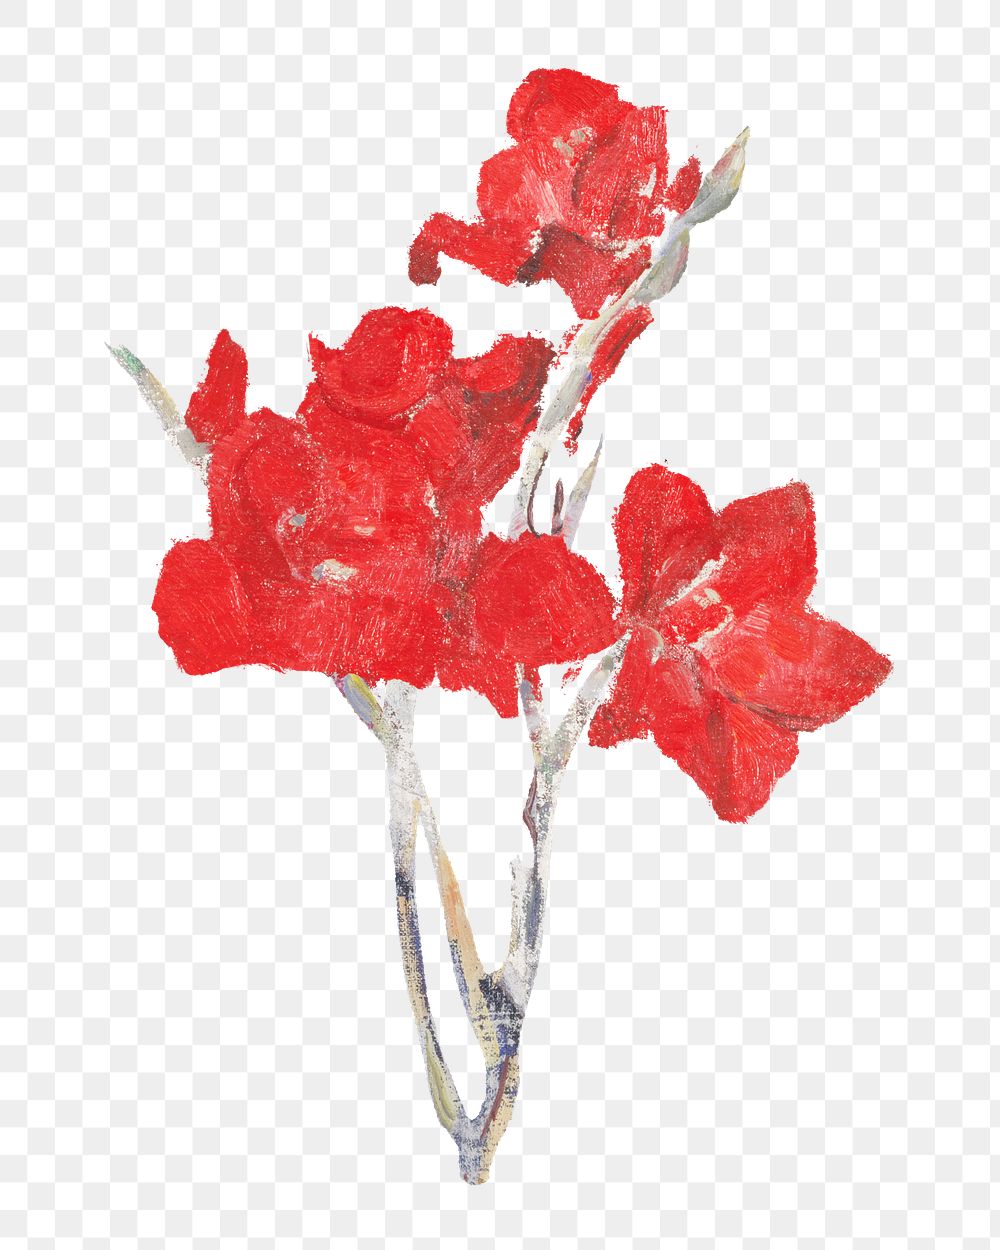 Png Mondrian&rsquo;s Red Gladioli sticker, flower illustration, transparent background.   Remixed by rawpixel.